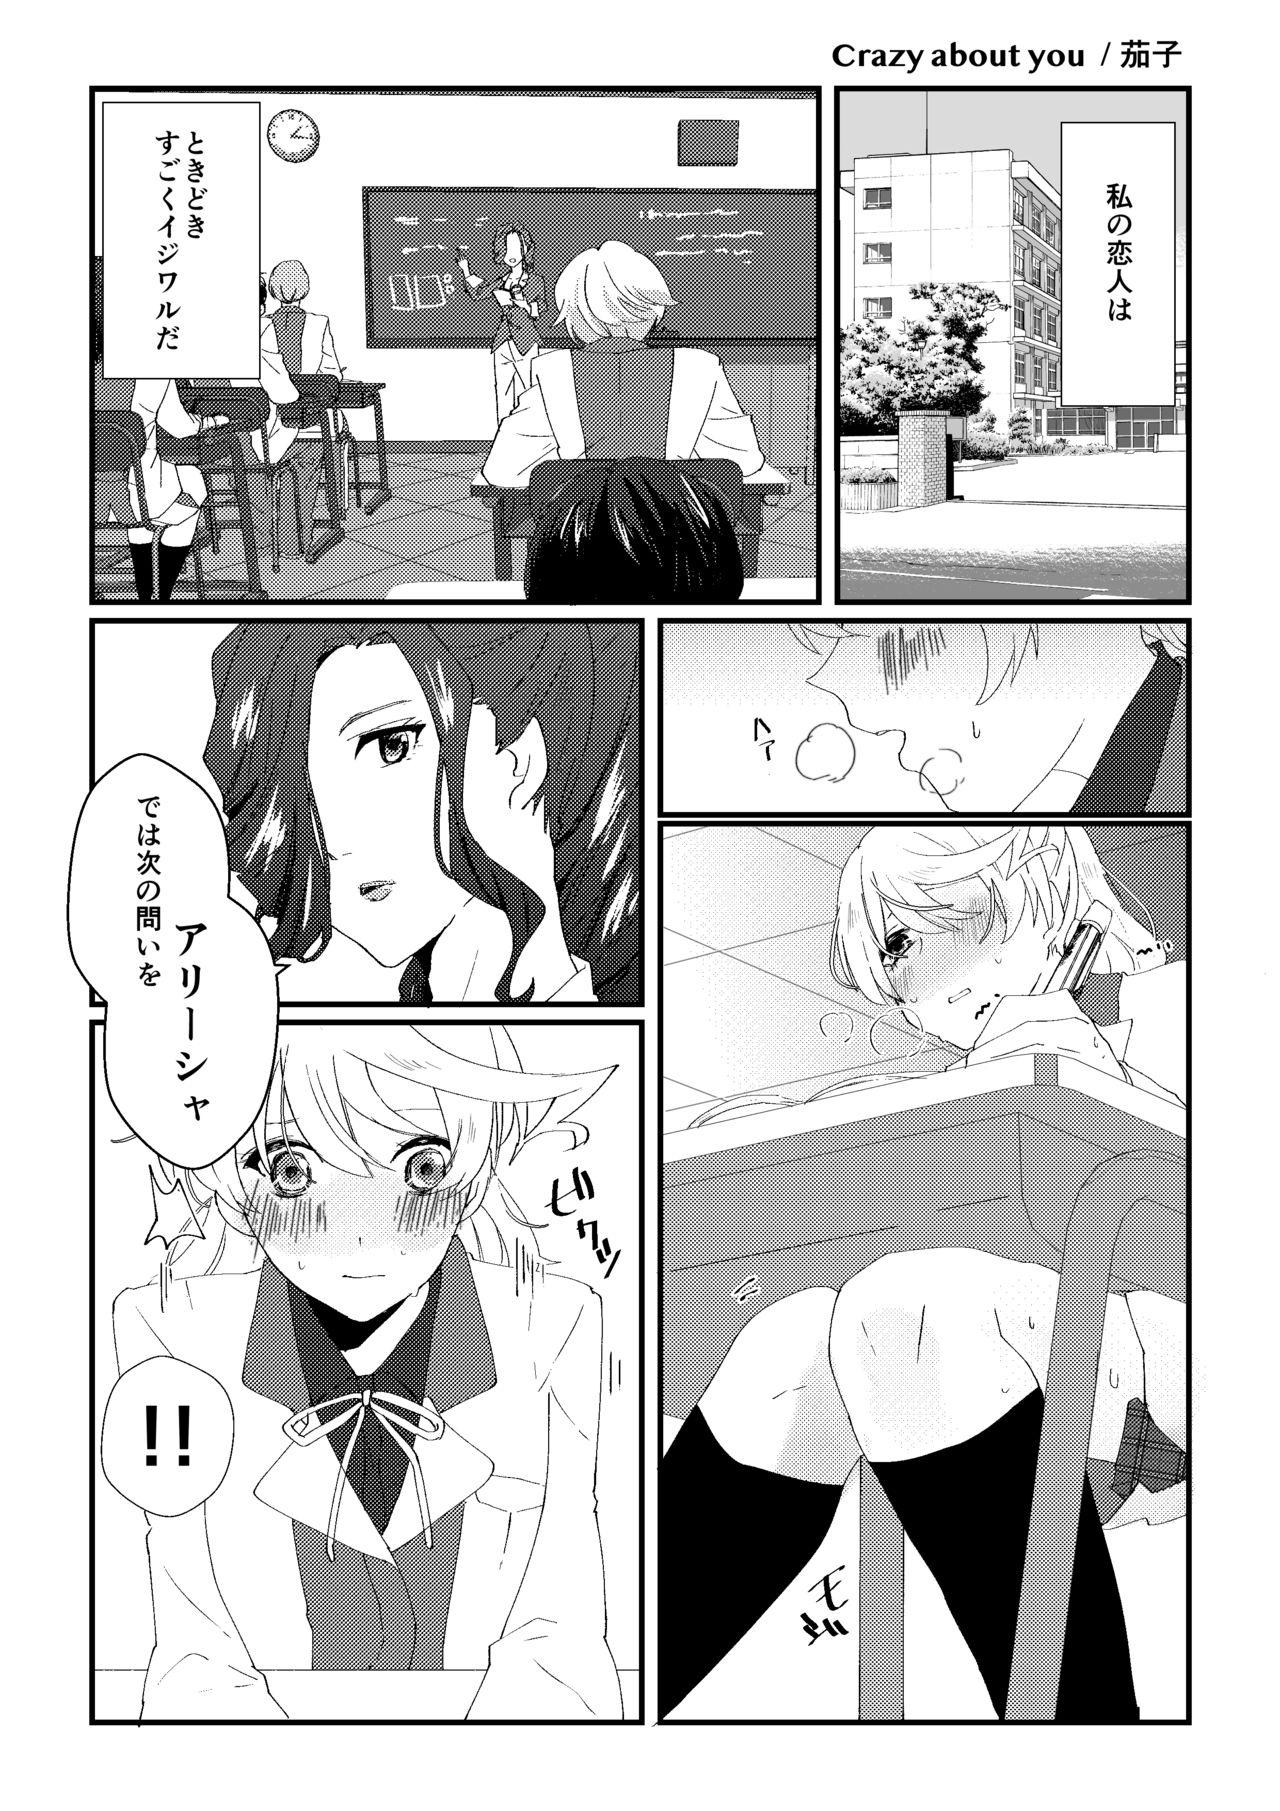 Nice Tits crazy about you - Tales of zestiria Cuck - Page 2